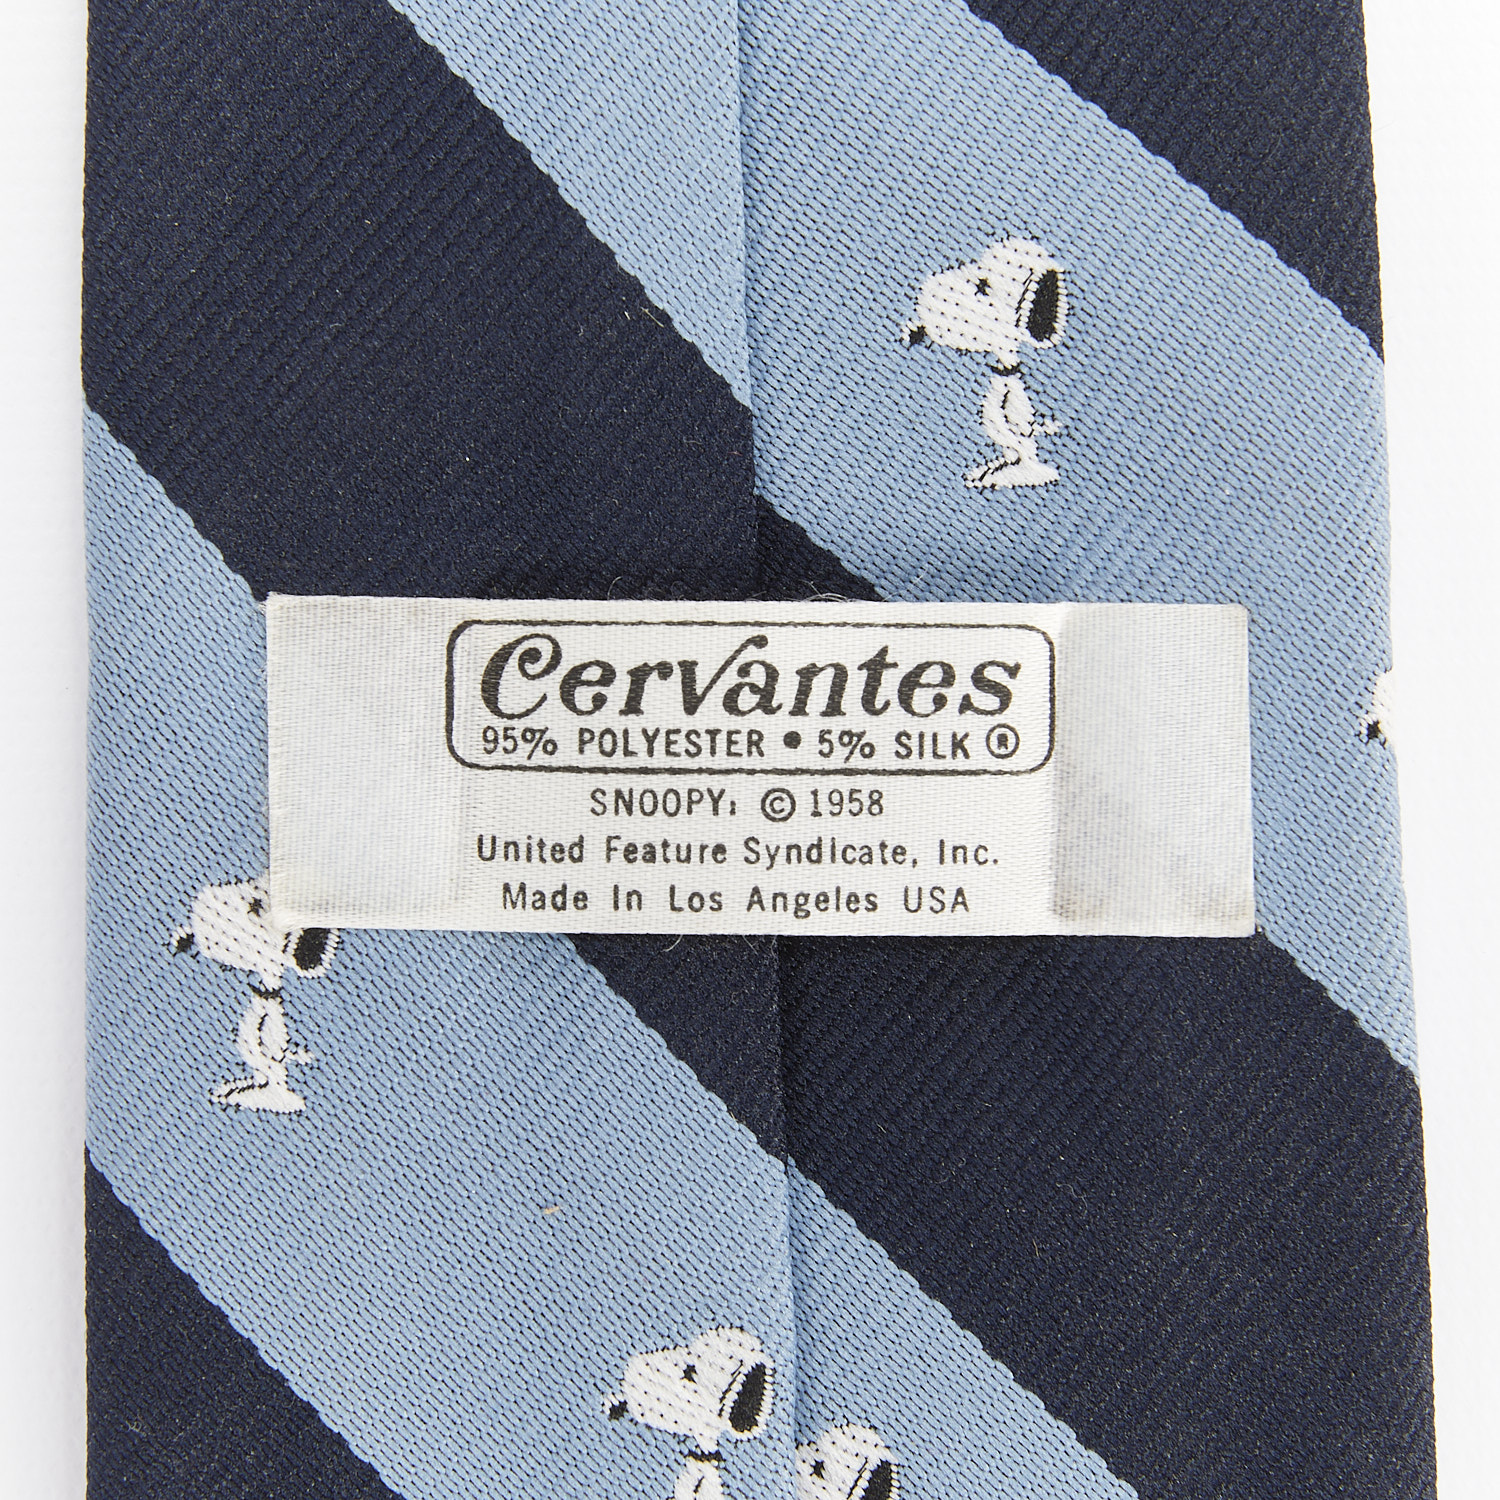 3 Ties of Snoopy - Striped & Space Themed - Image 8 of 10